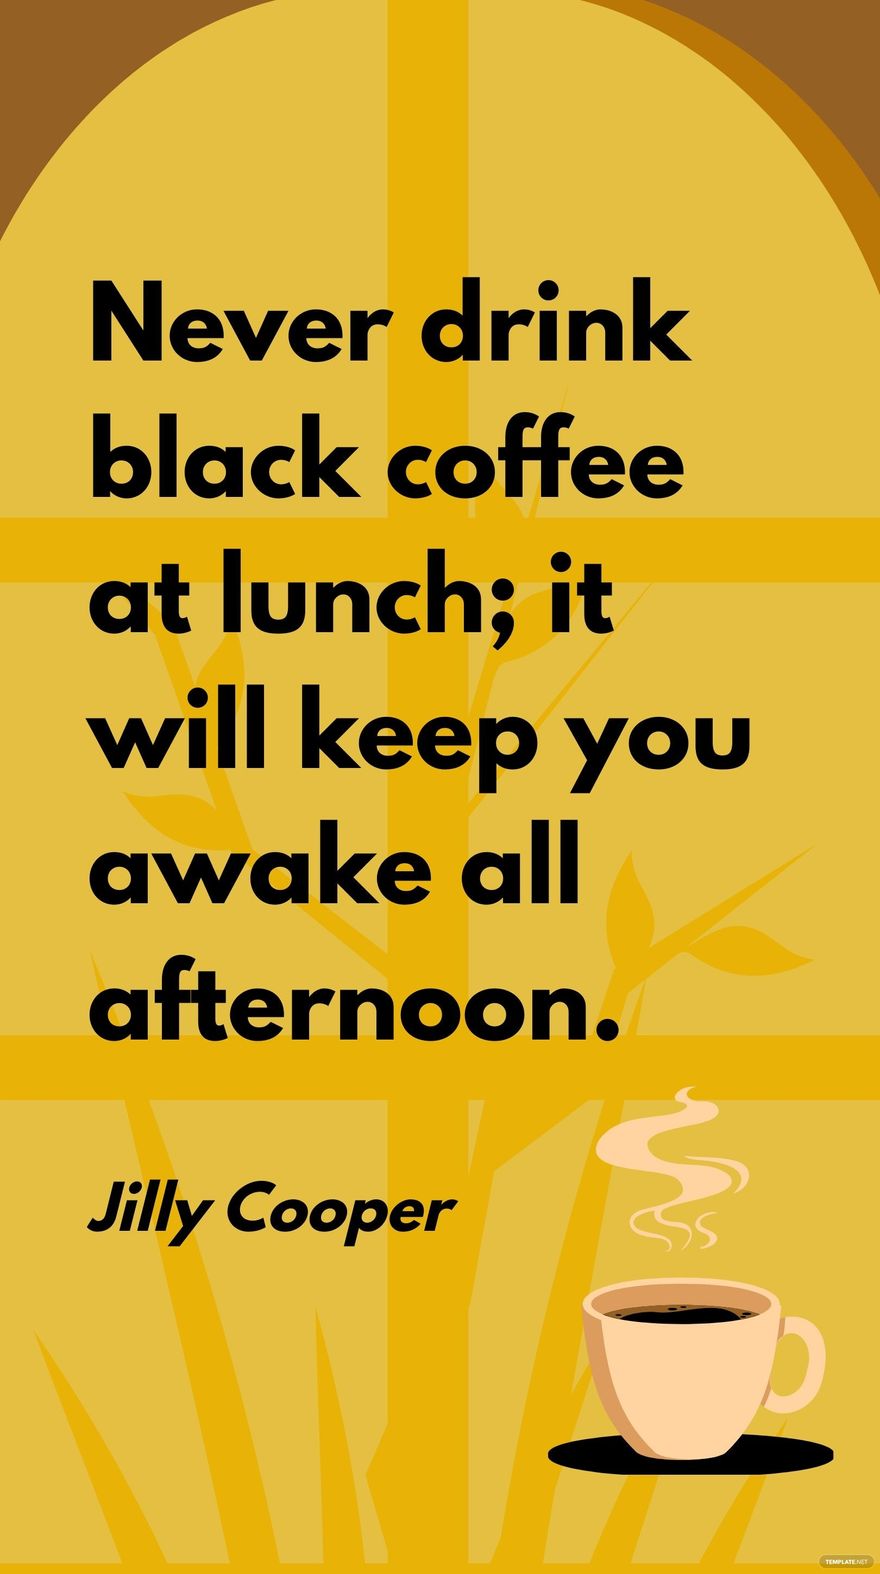 Jilly Cooper - Never drink black coffee at lunch; it will keep you awake all afternoon. in JPG